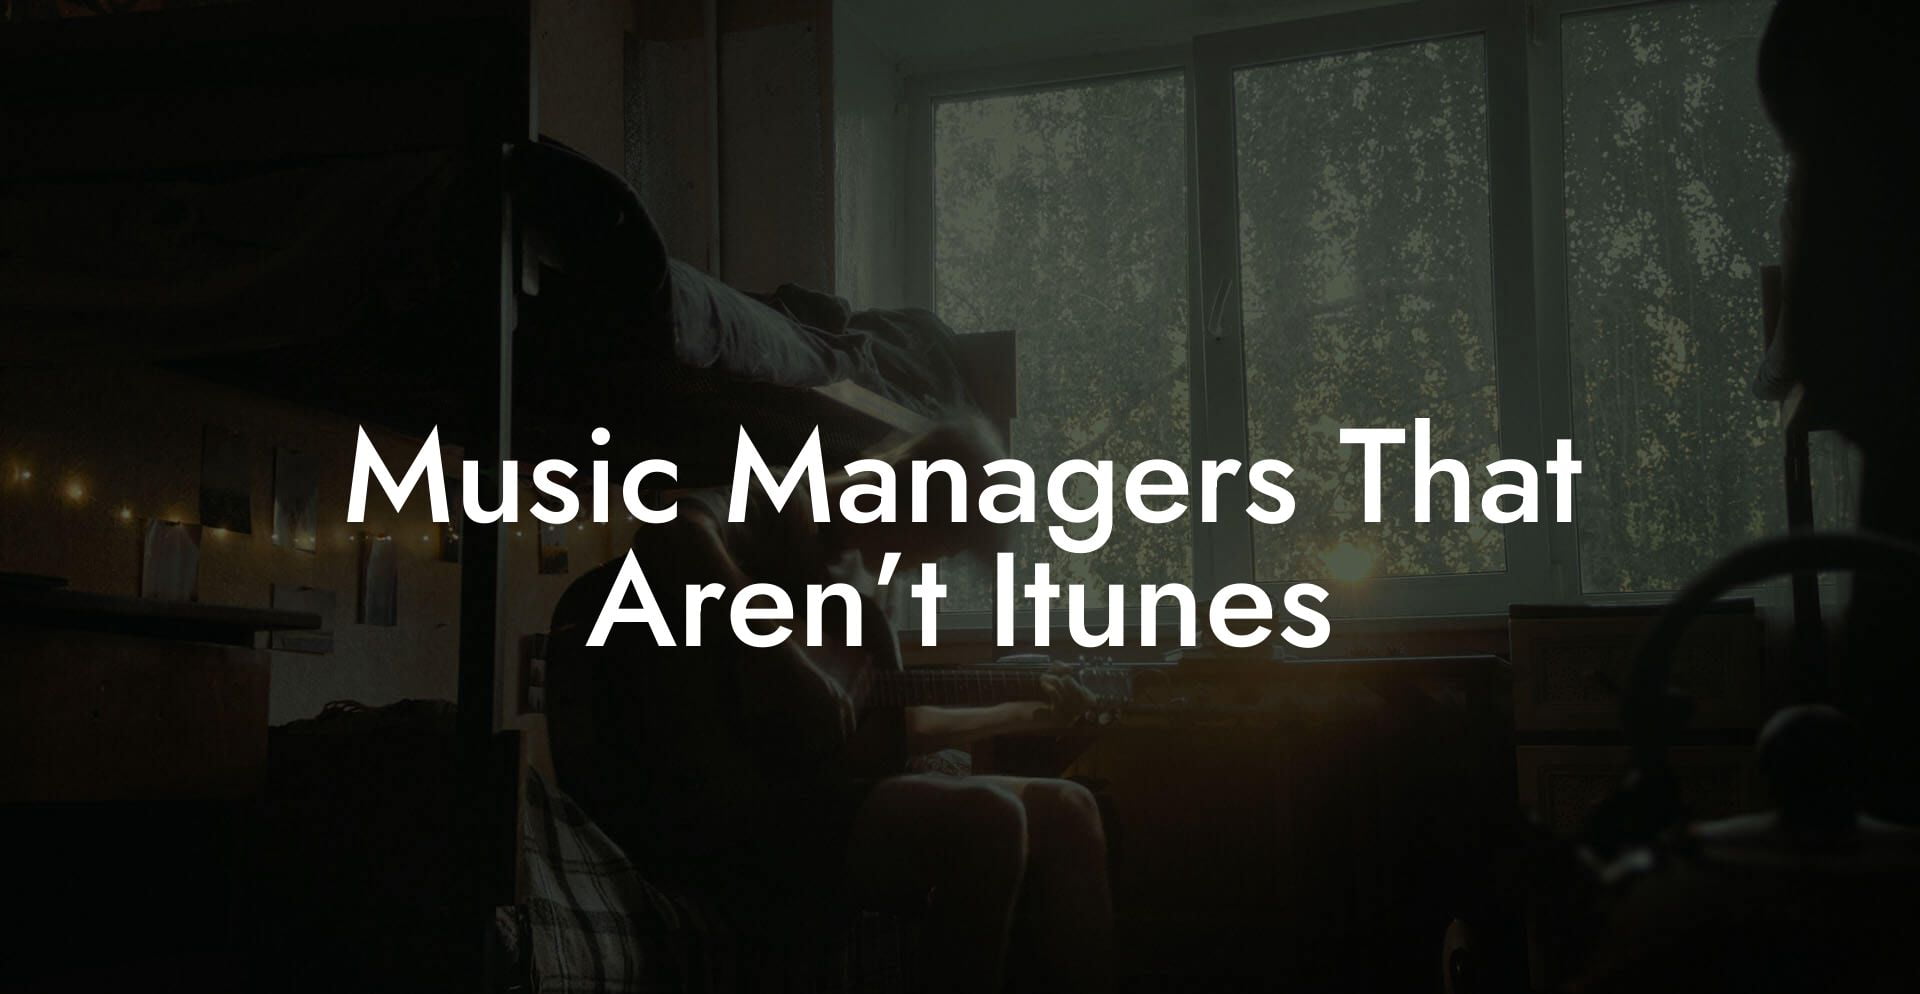 Music Managers That Aren’t Itunes